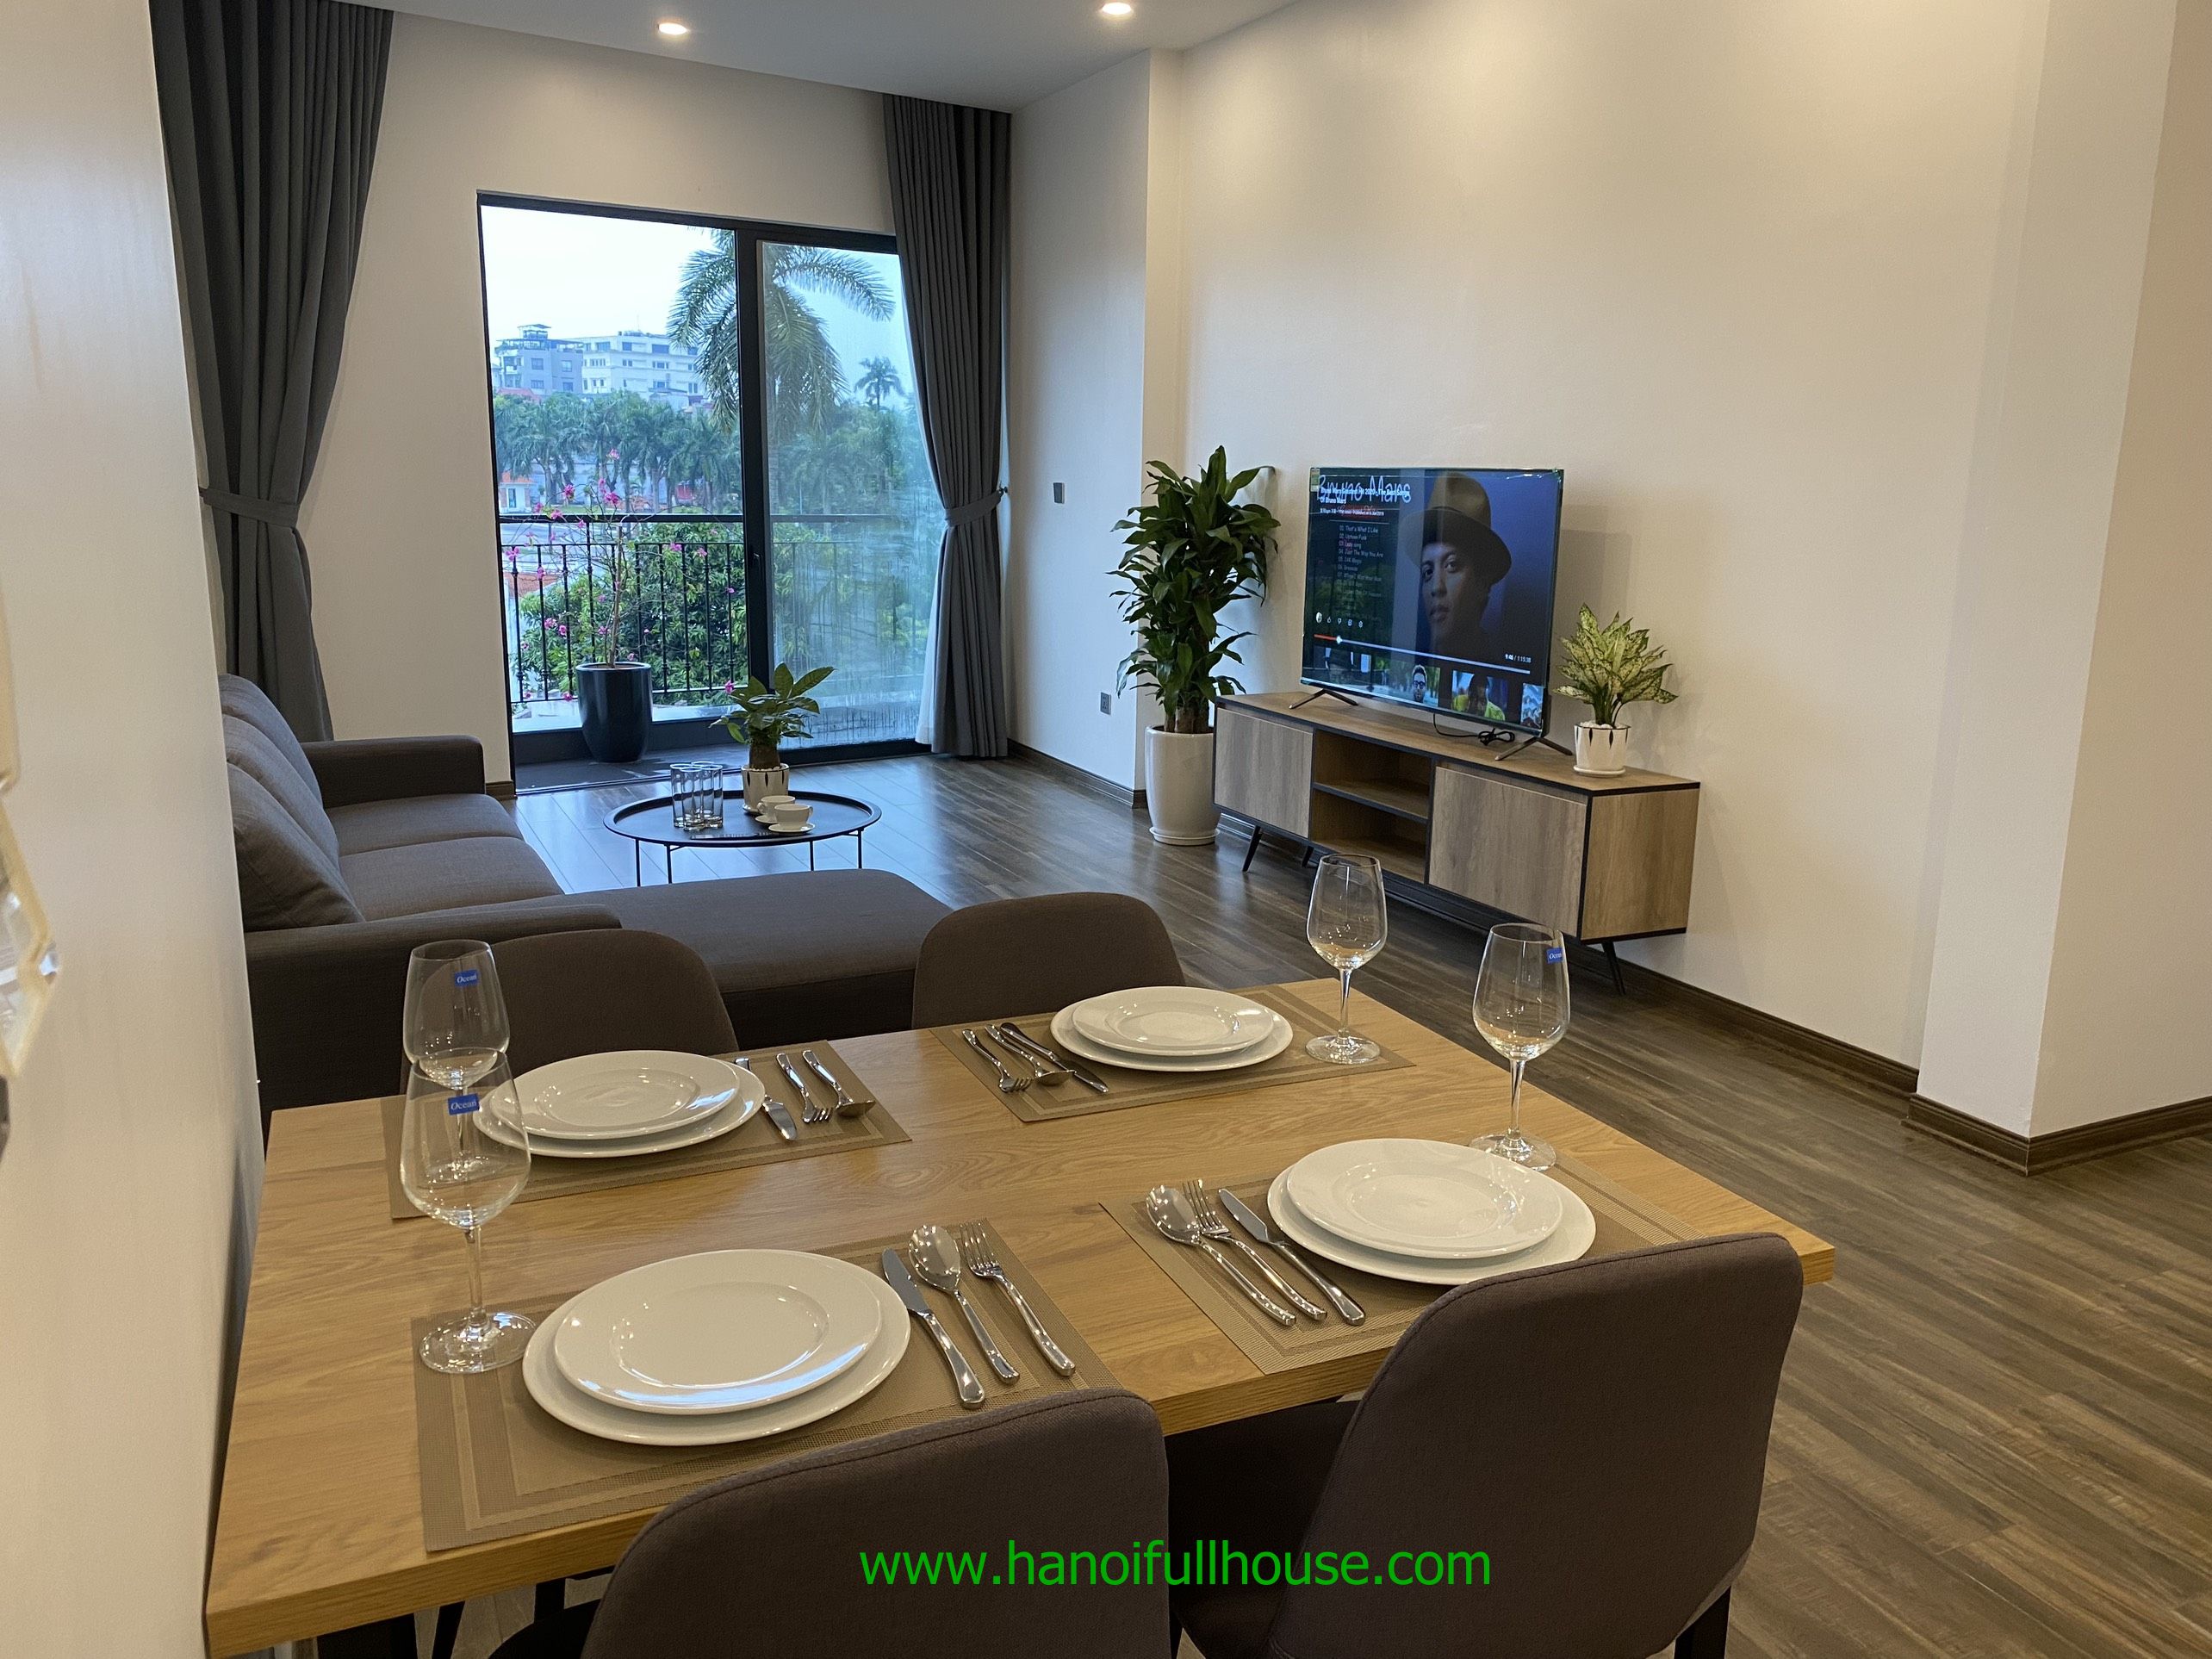 Hanoi brand new 2 bedroom apartment in Tay Ho for rent